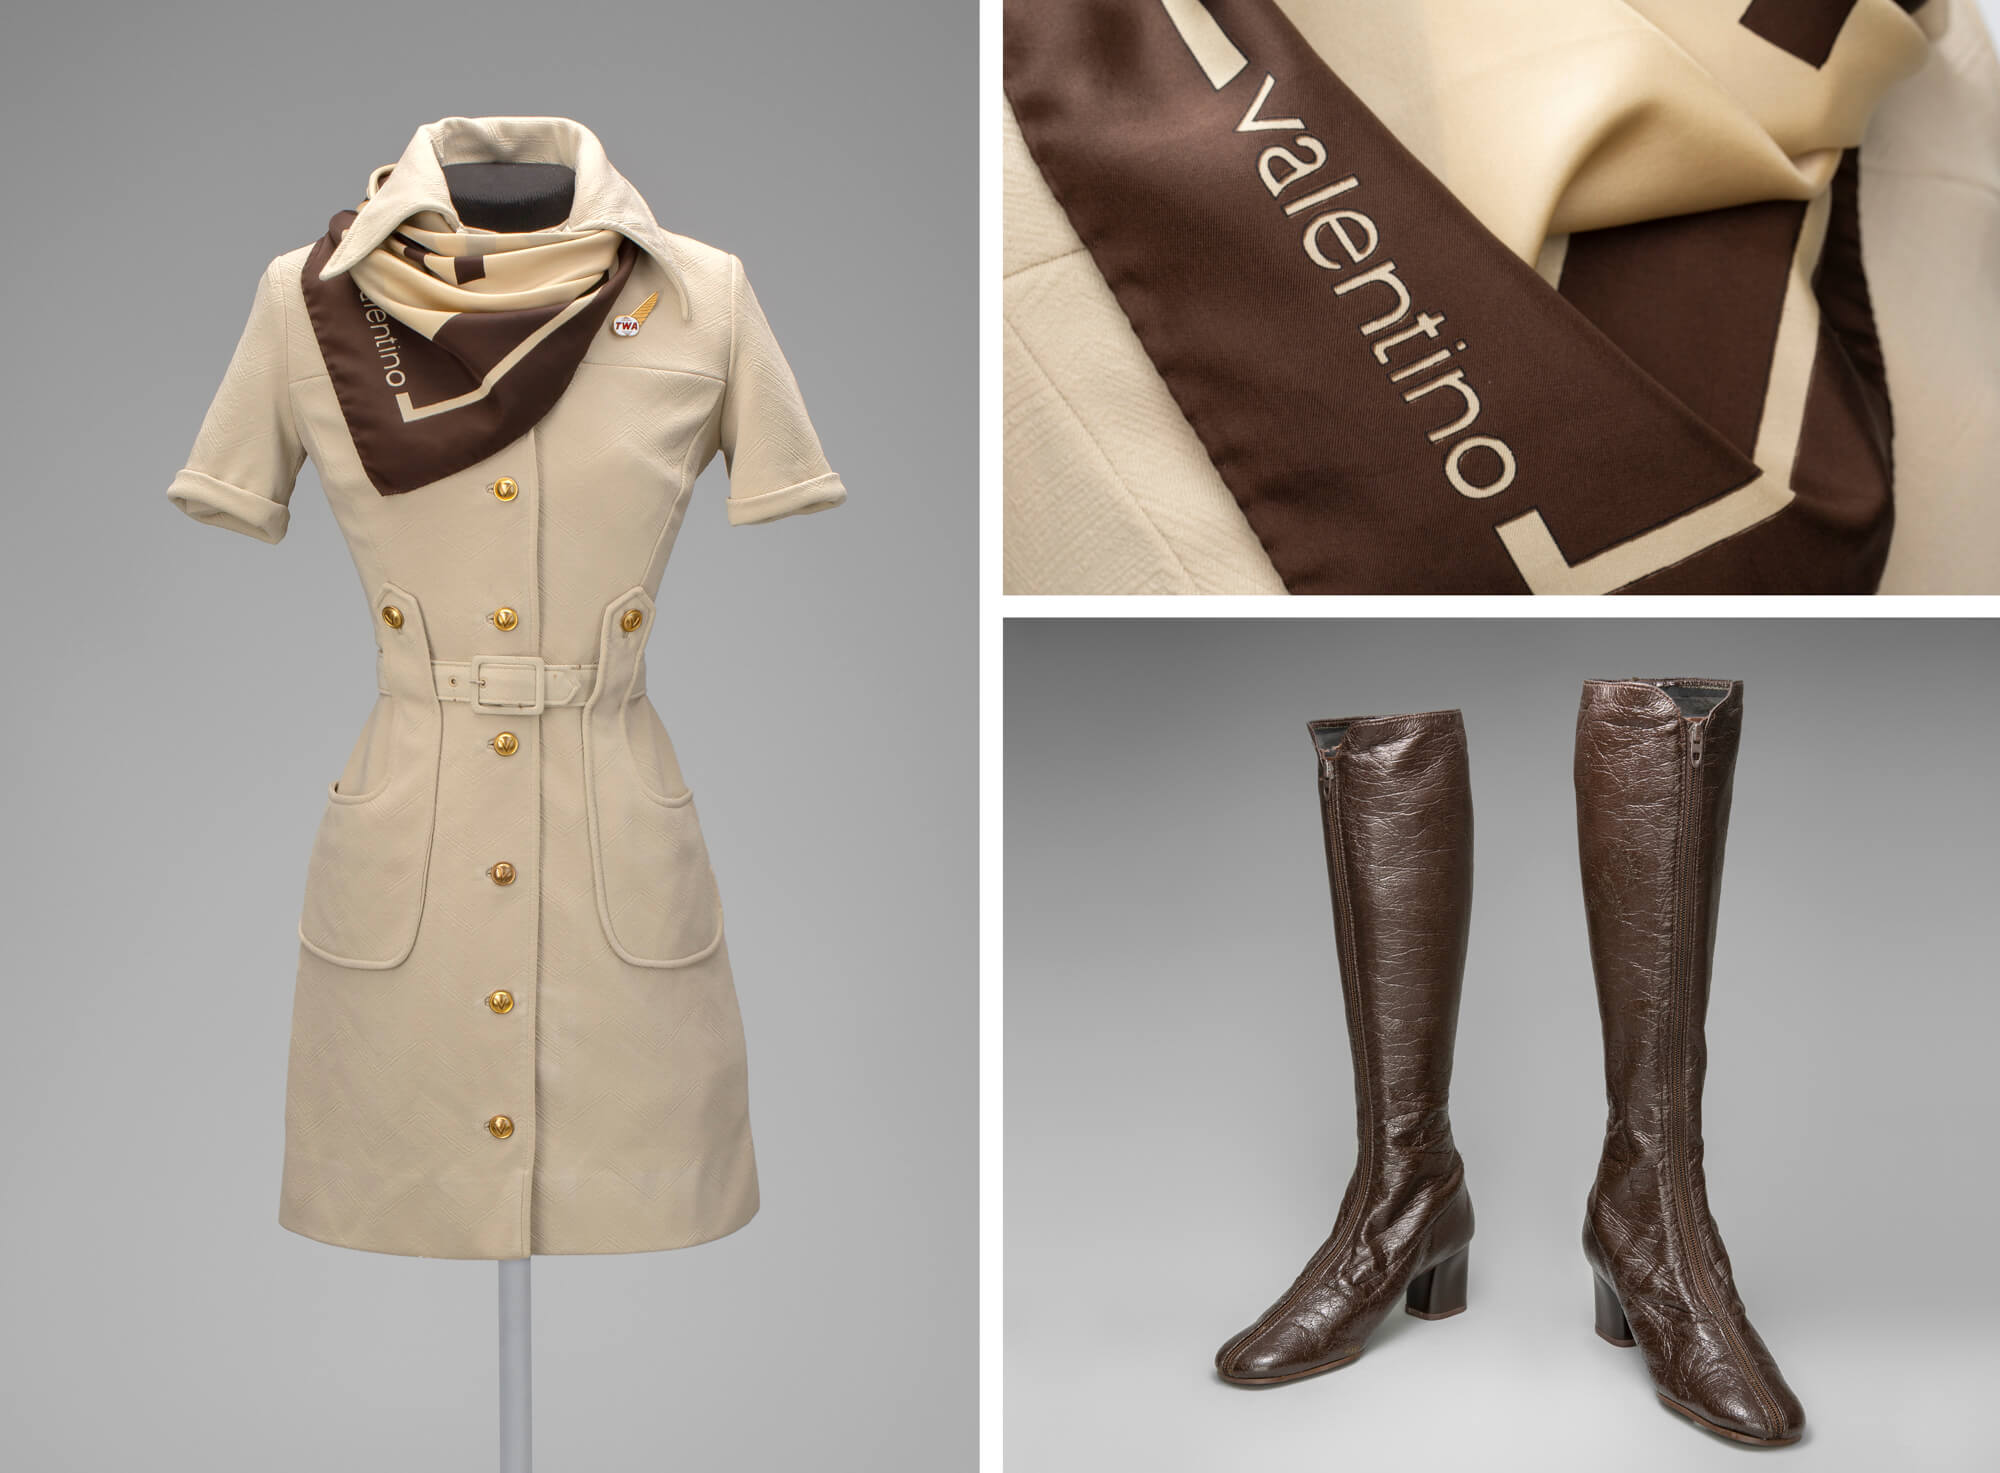 The Trans World Airlines uniform in beige, designed by Valentino in 1971